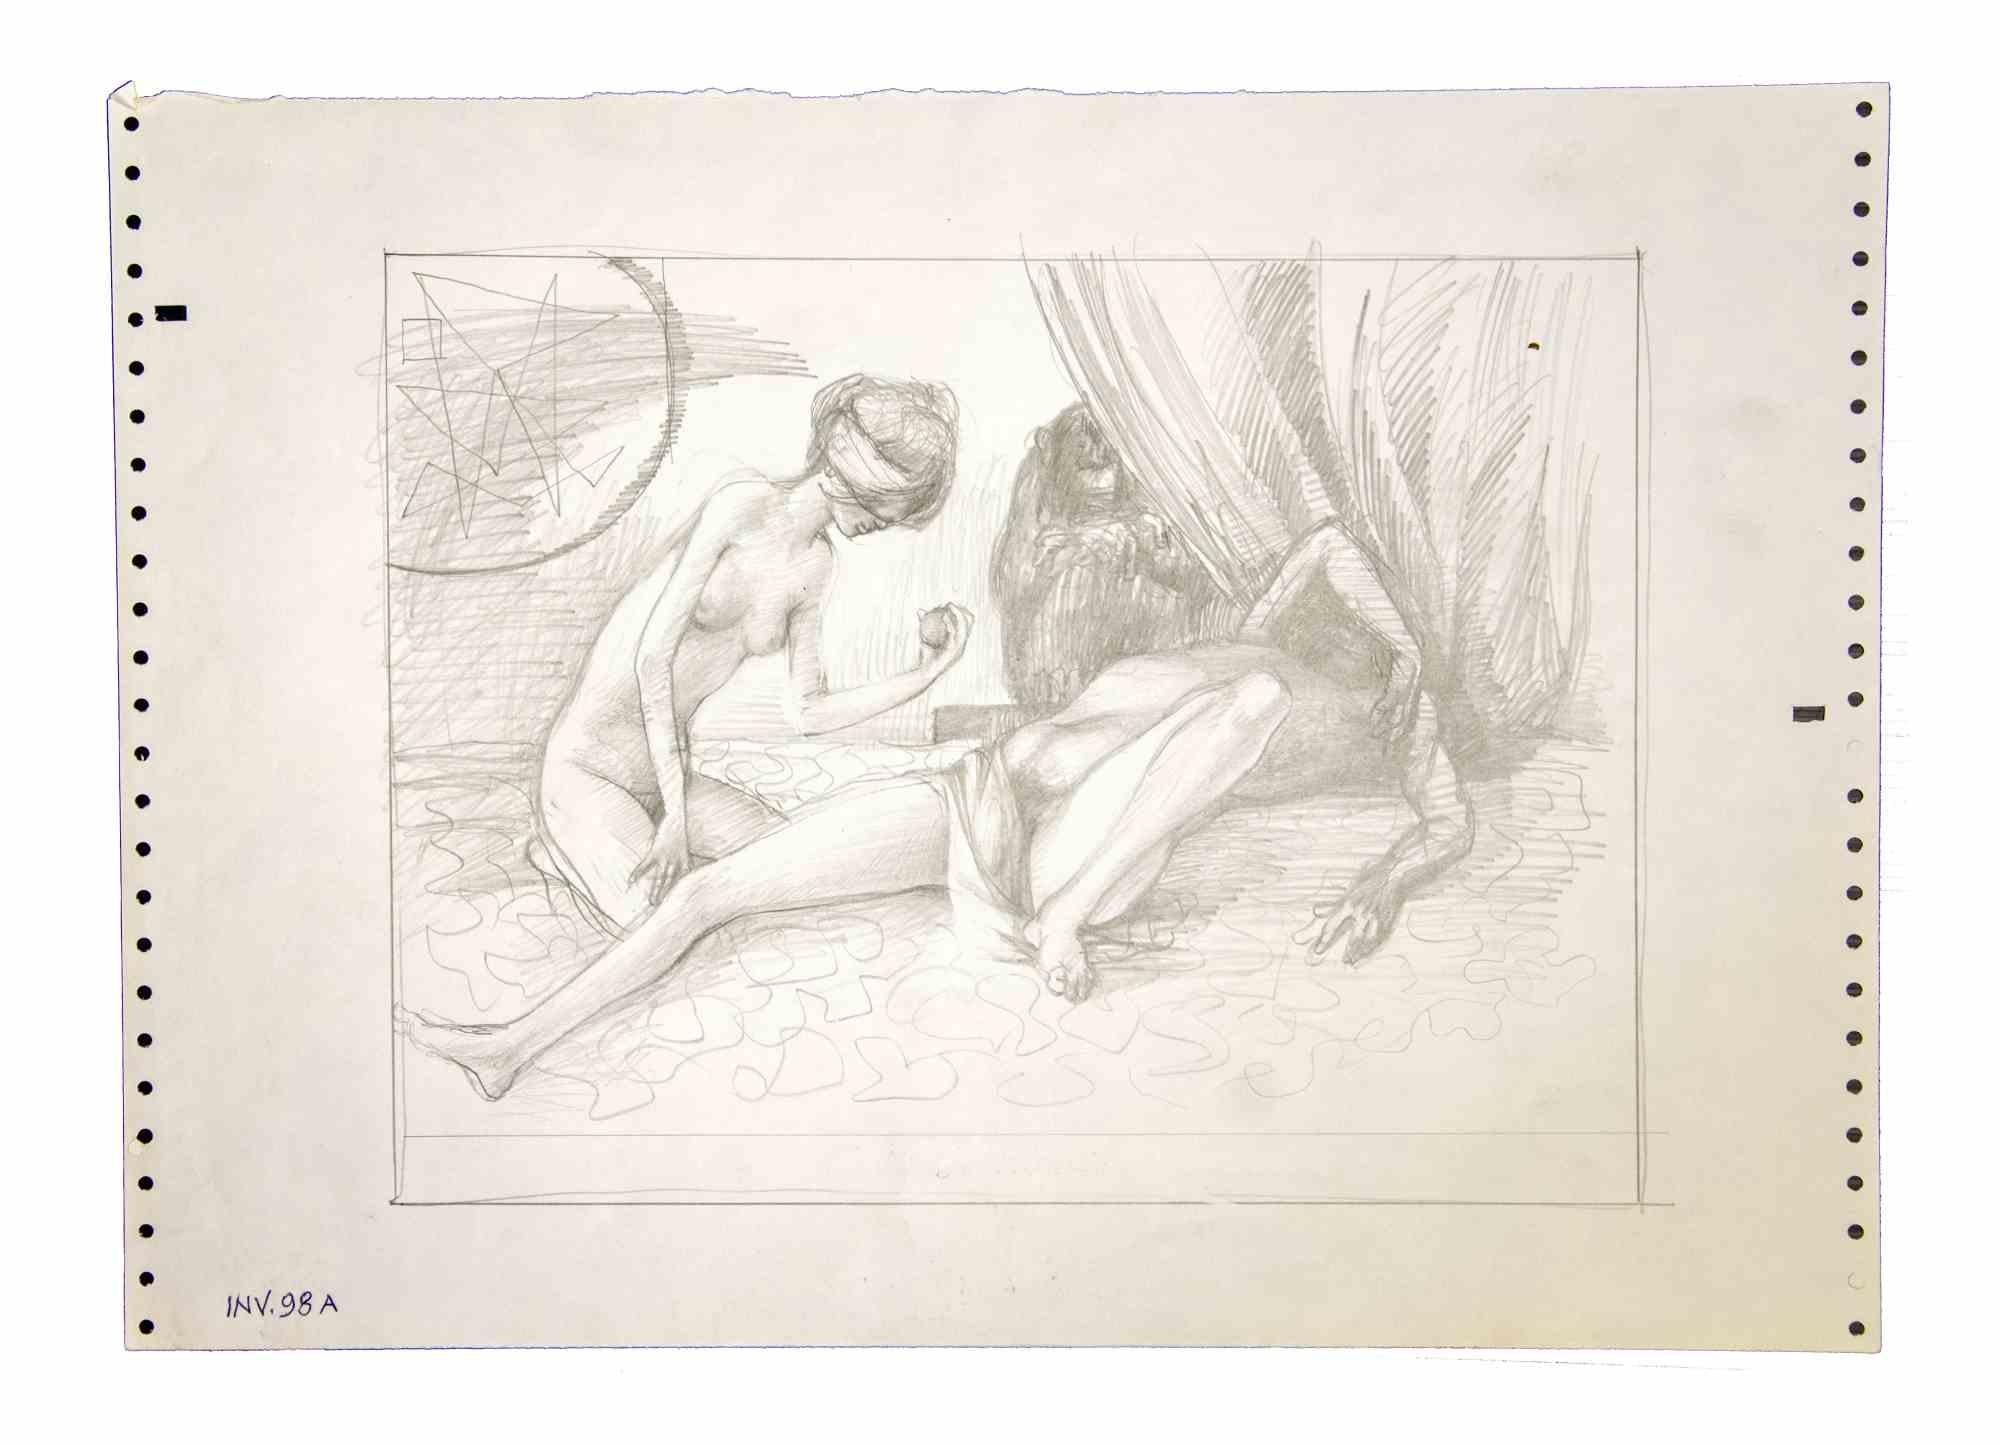 Adam and Eve is an original contemporary artwork realized in the 1970s by the Italian Contemporary artist  Leo Guida  (1992 - 2017).

Original drawings in pencil on paper.

Good conditions but aged.

The artwork is depicted through strong strokes in